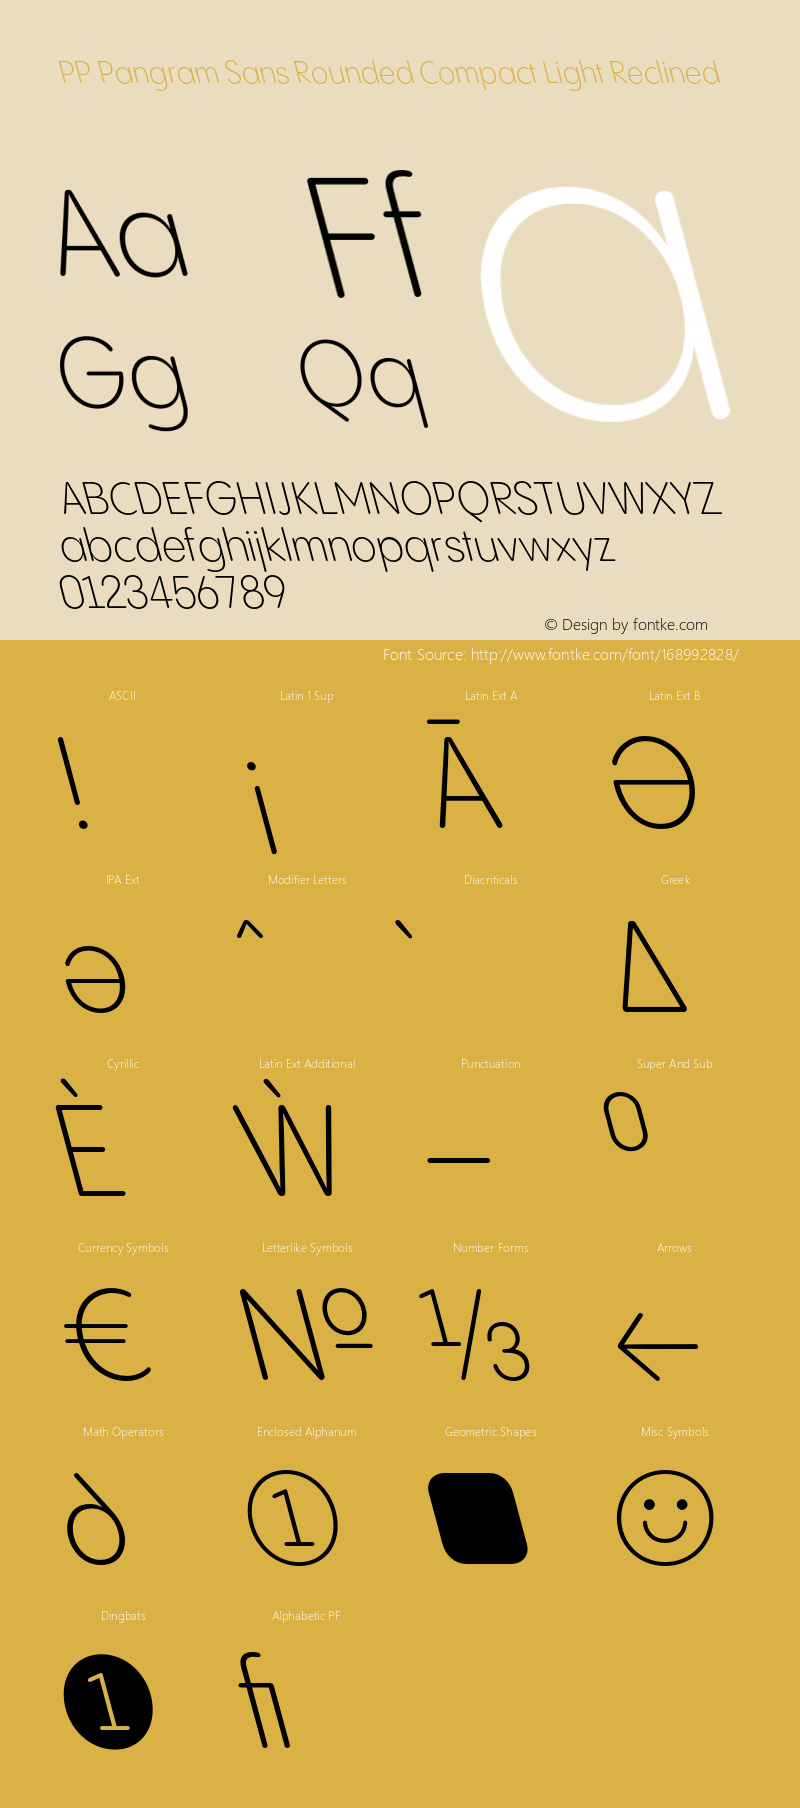 PP Pangram Sans Rounded Compact Light Reclined Version 1.100 | FøM fixed图片样张